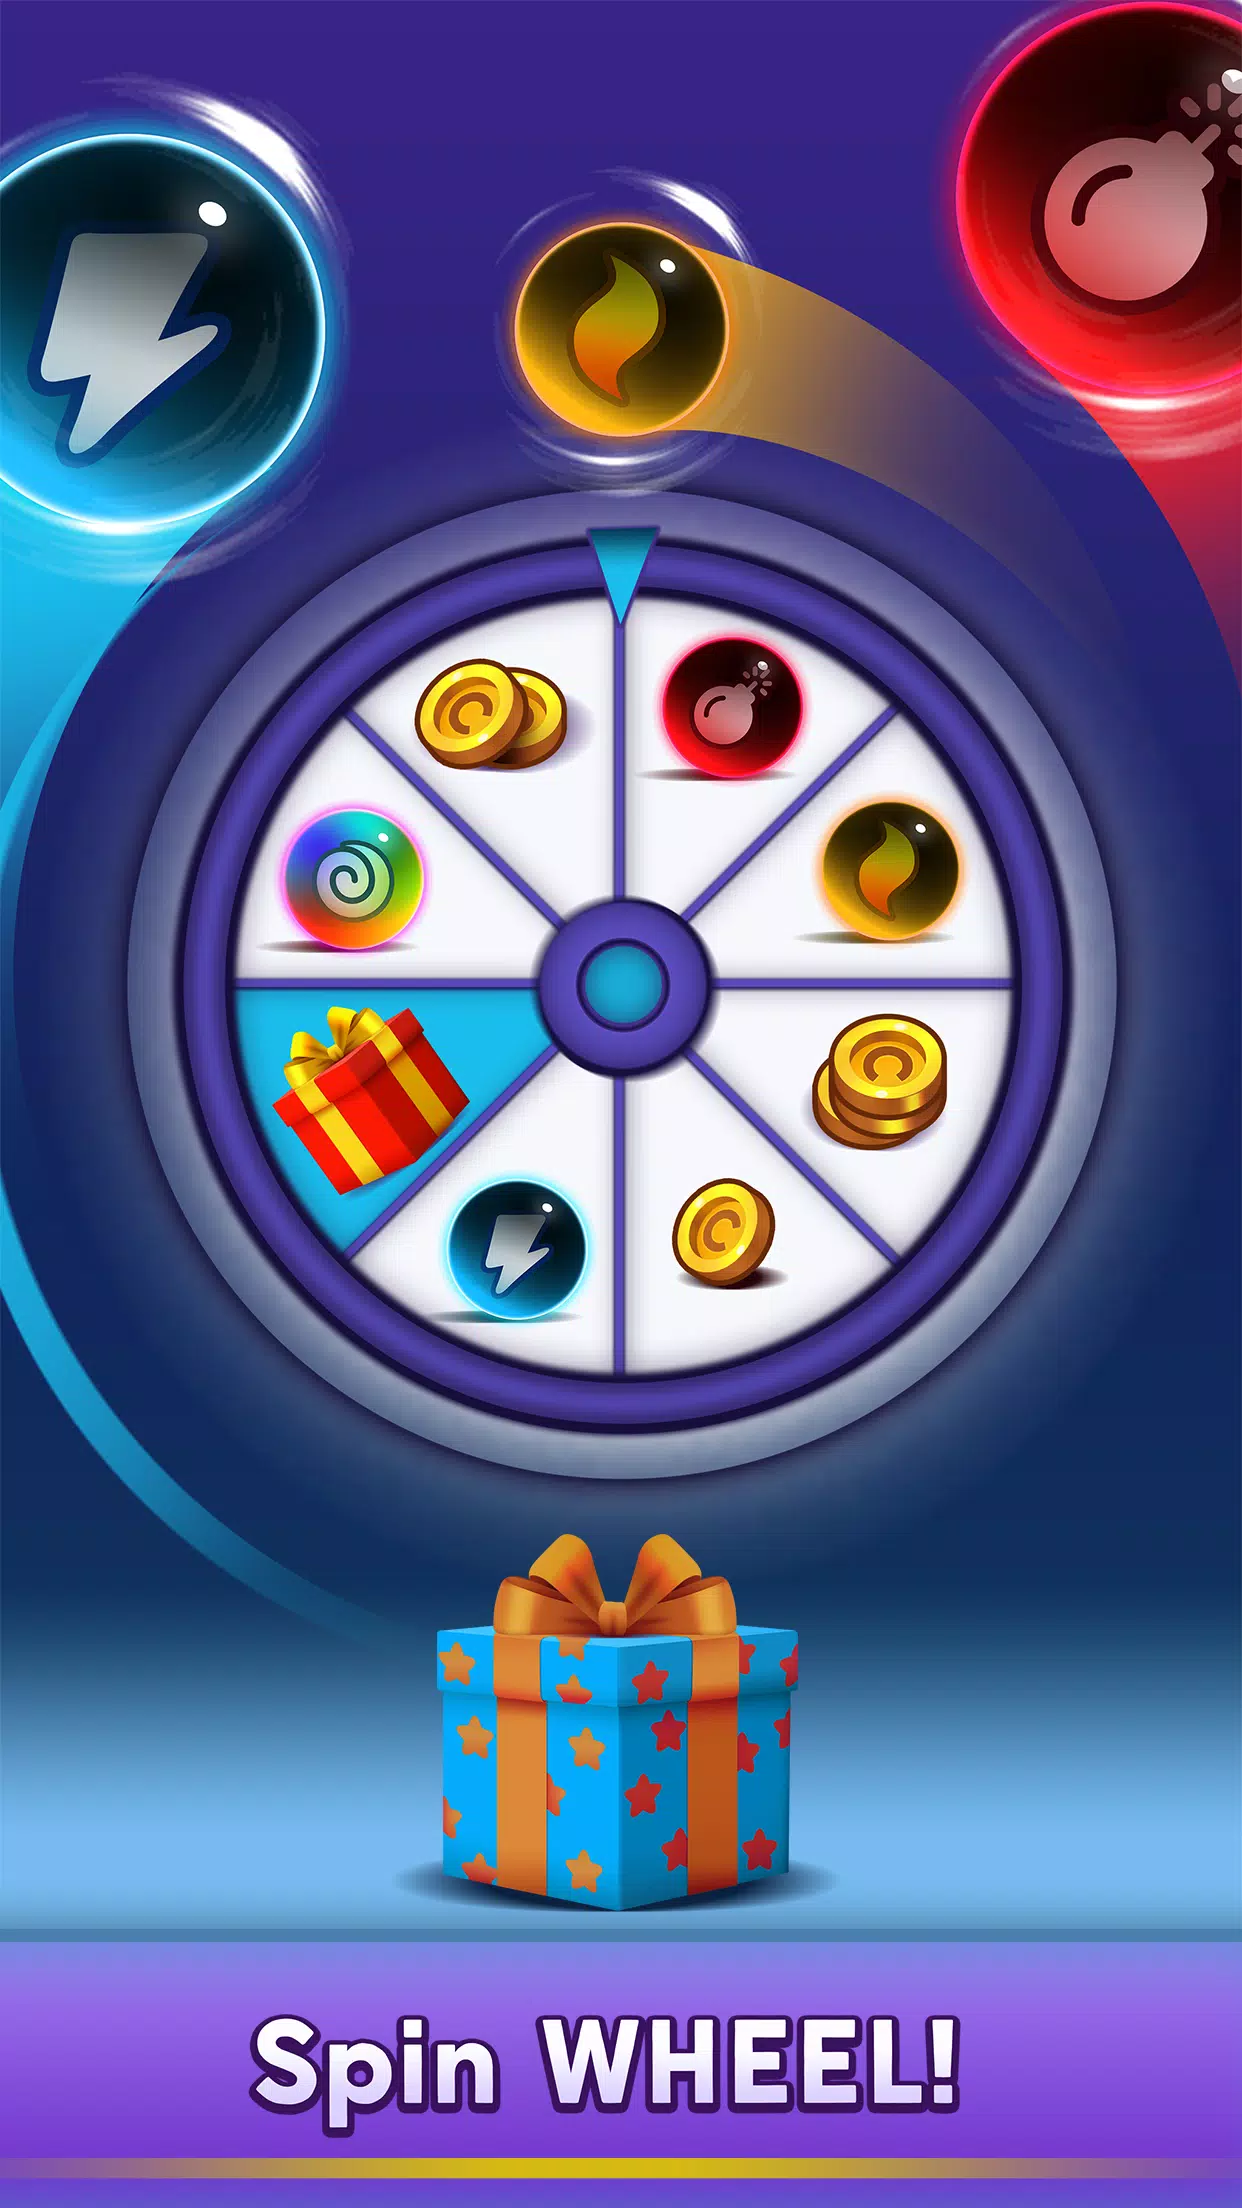 Bubble Shooter Pro: Play Bubble Shooter Pro for free